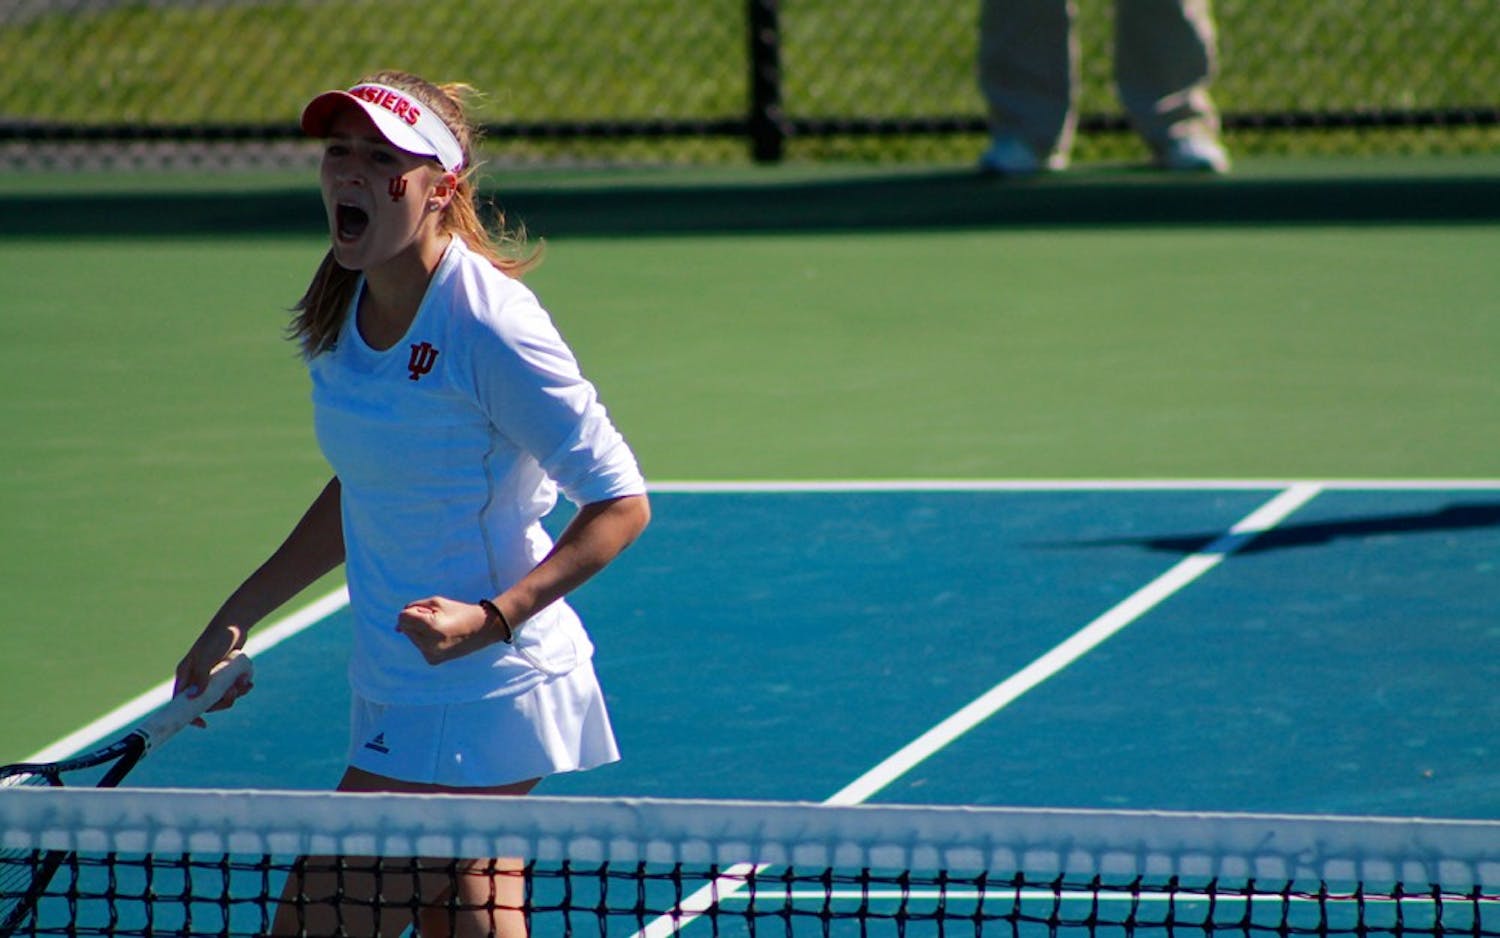 Sophomore Natalie Whalen cheers after scoring a point in a doubles match against Illinois&nbsp;Friday afternoon. The Hoosiers fell against the Fighting Illini., 6-1.&nbsp;